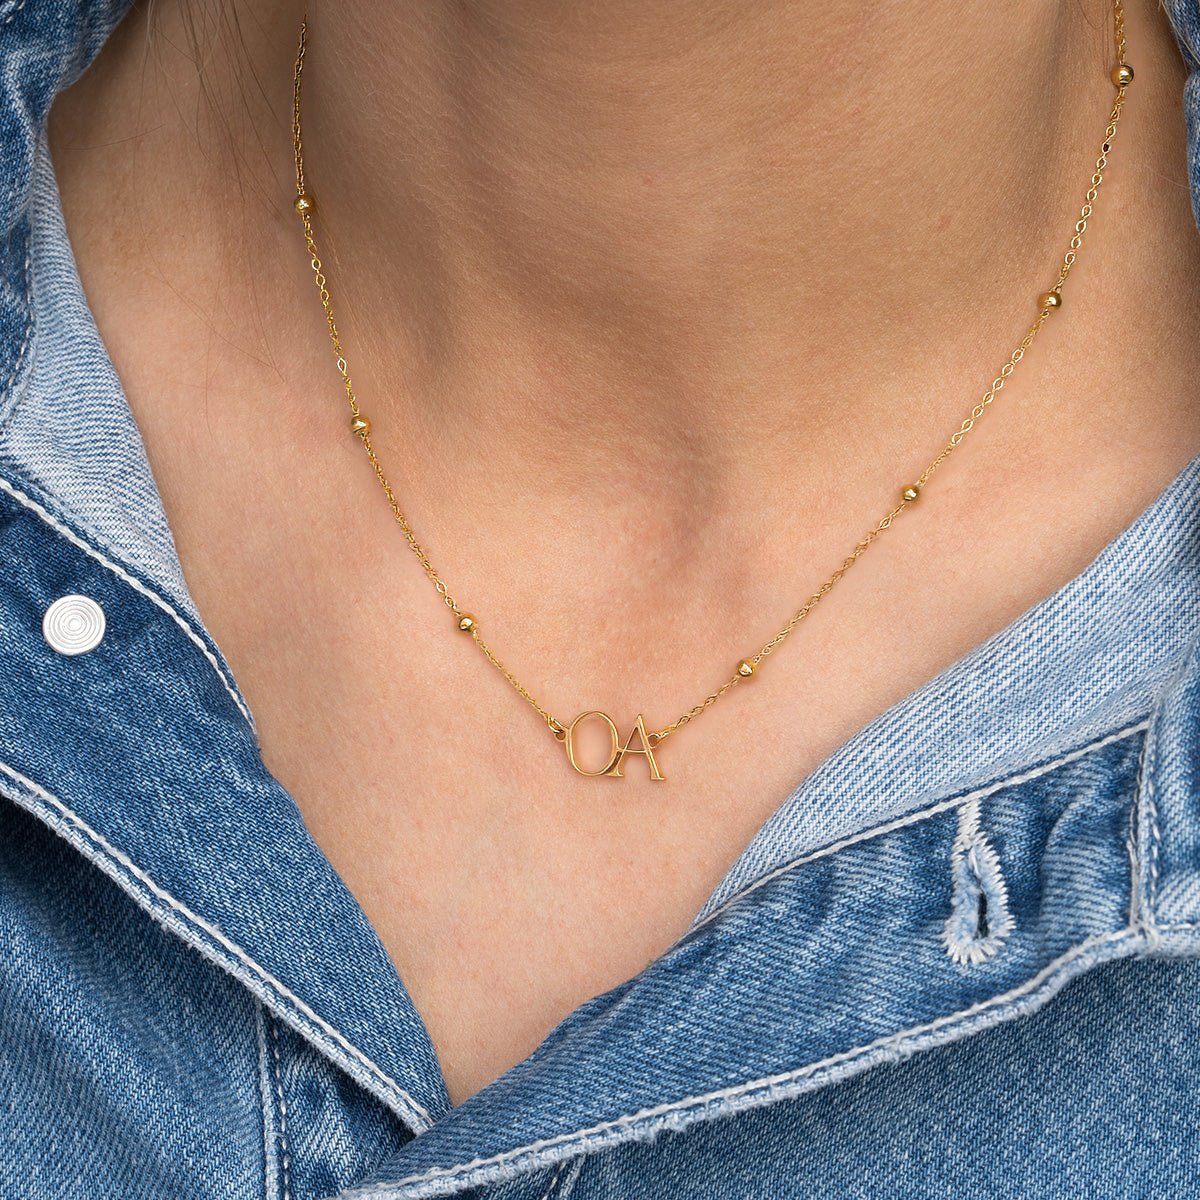 Gold Plated Initials Necklace